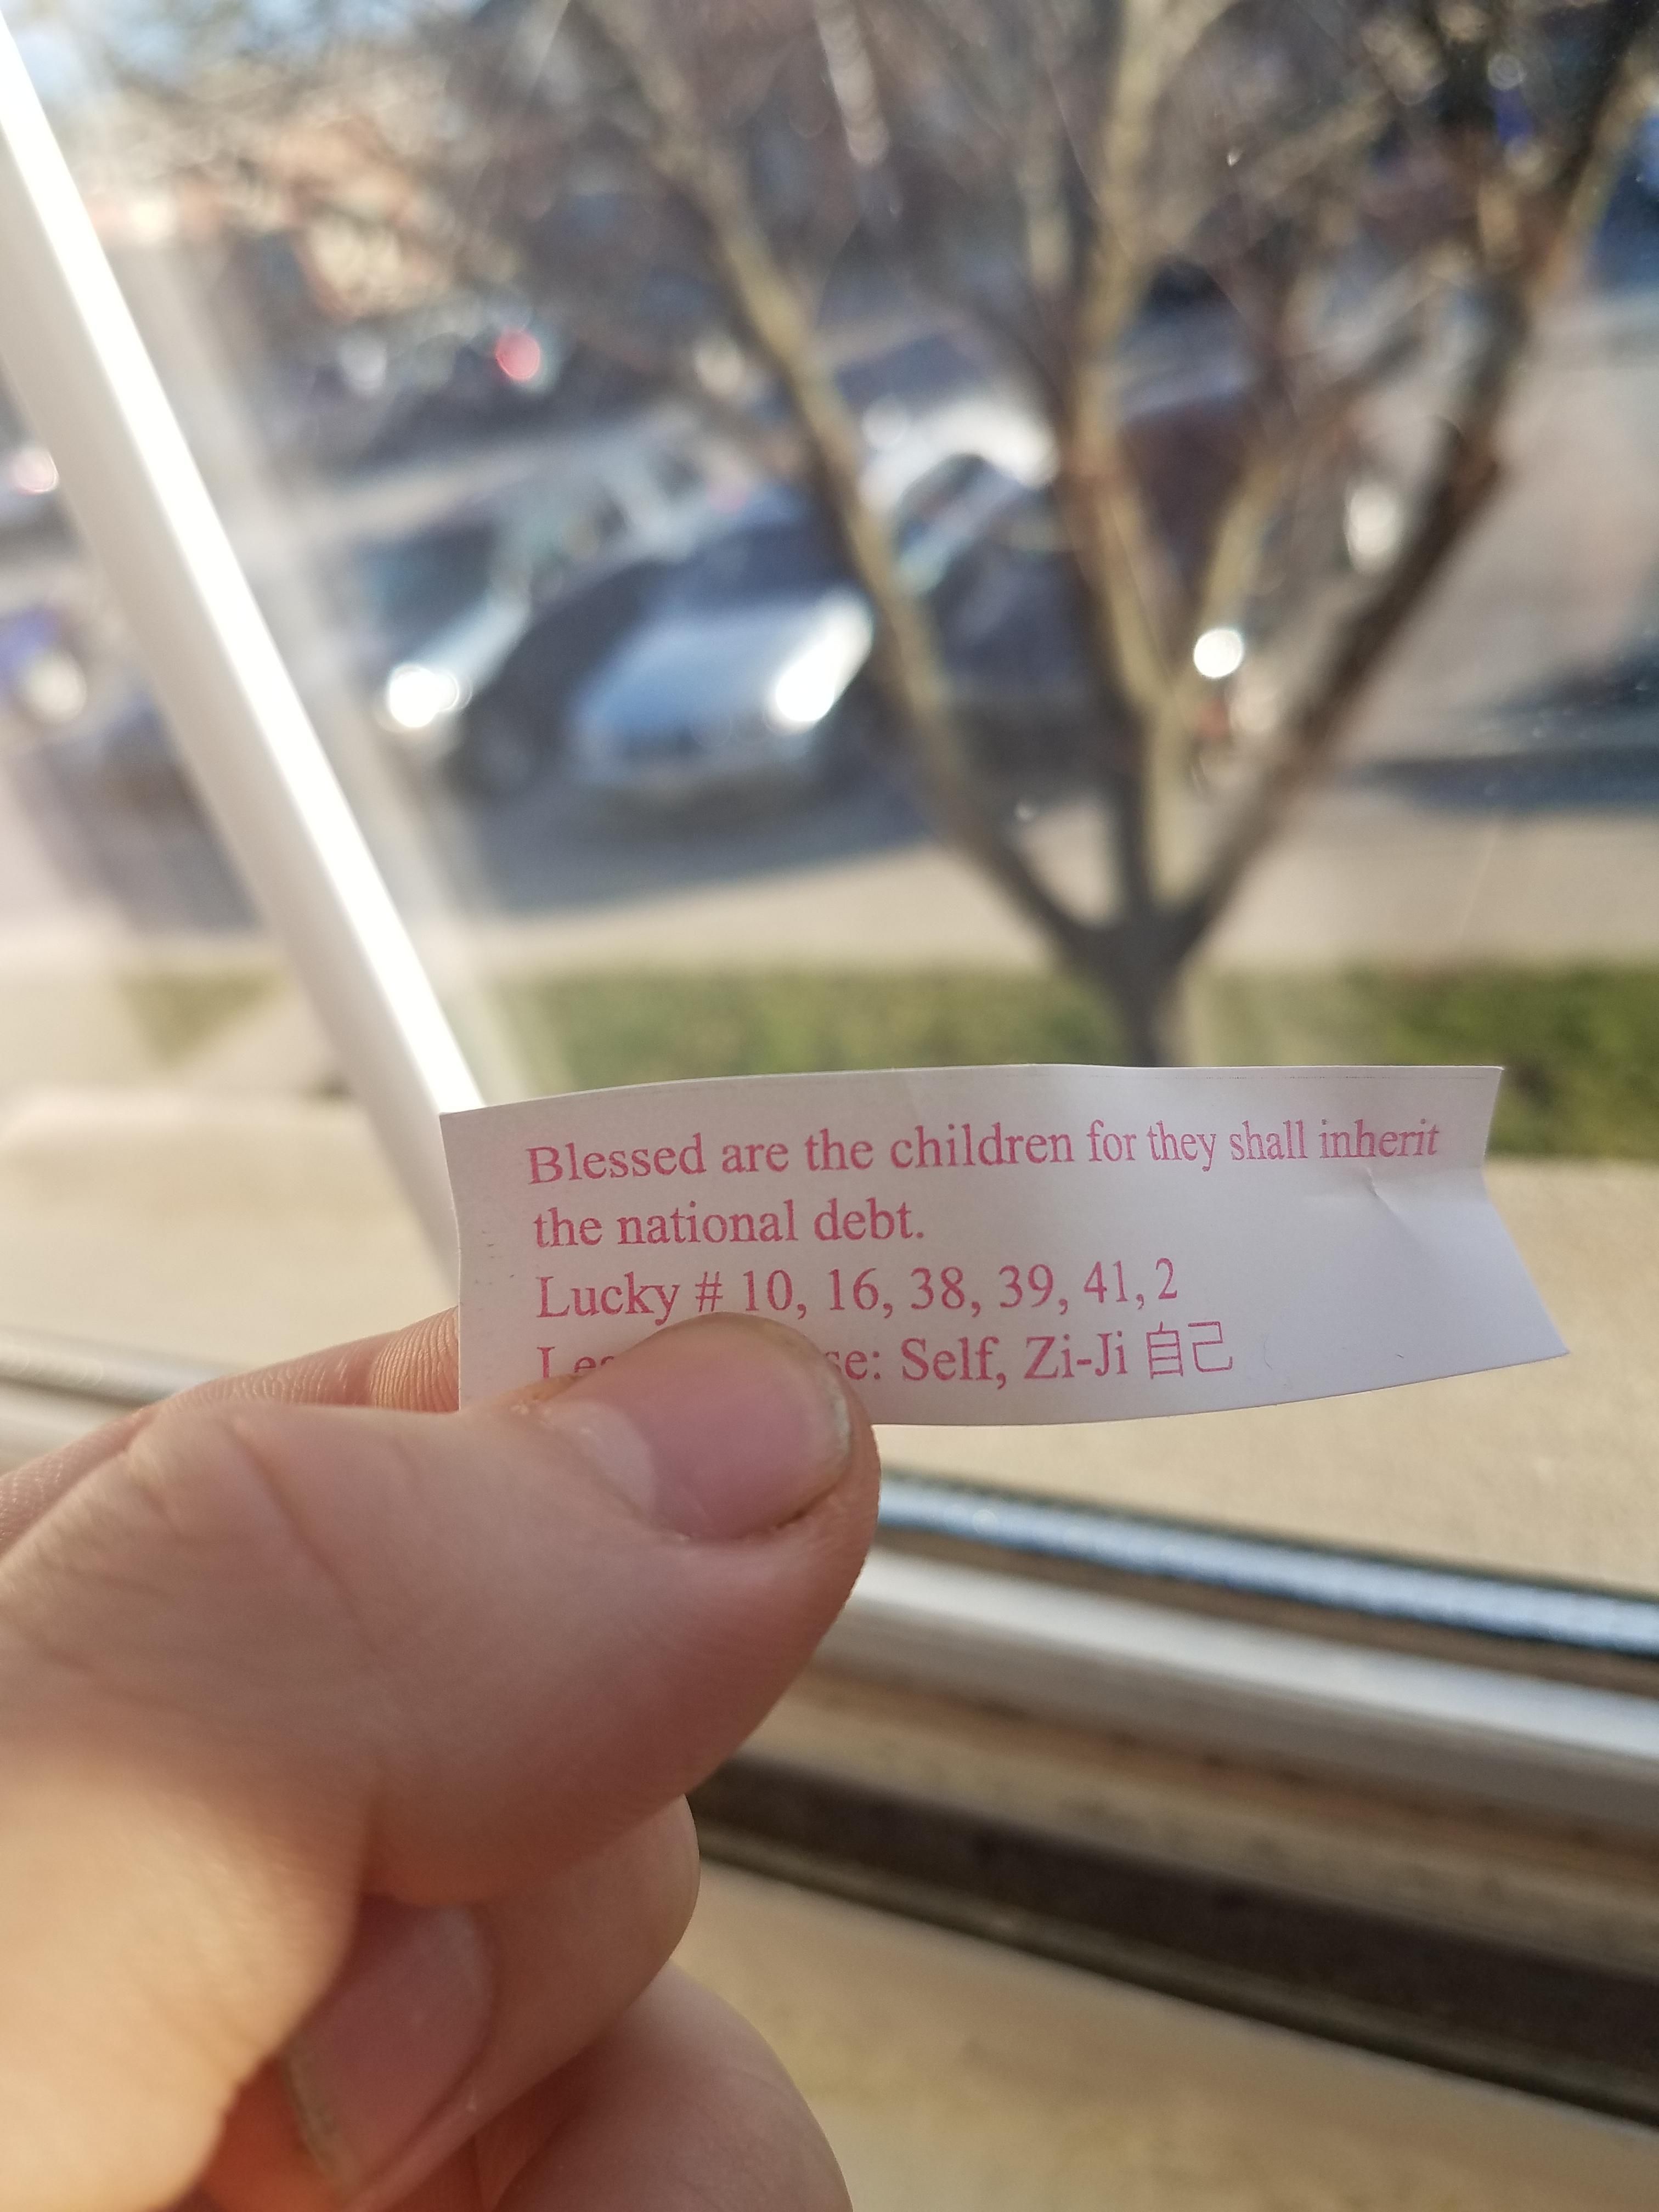 The Most ***ed Up Fortune Cookie I've Ever Seen